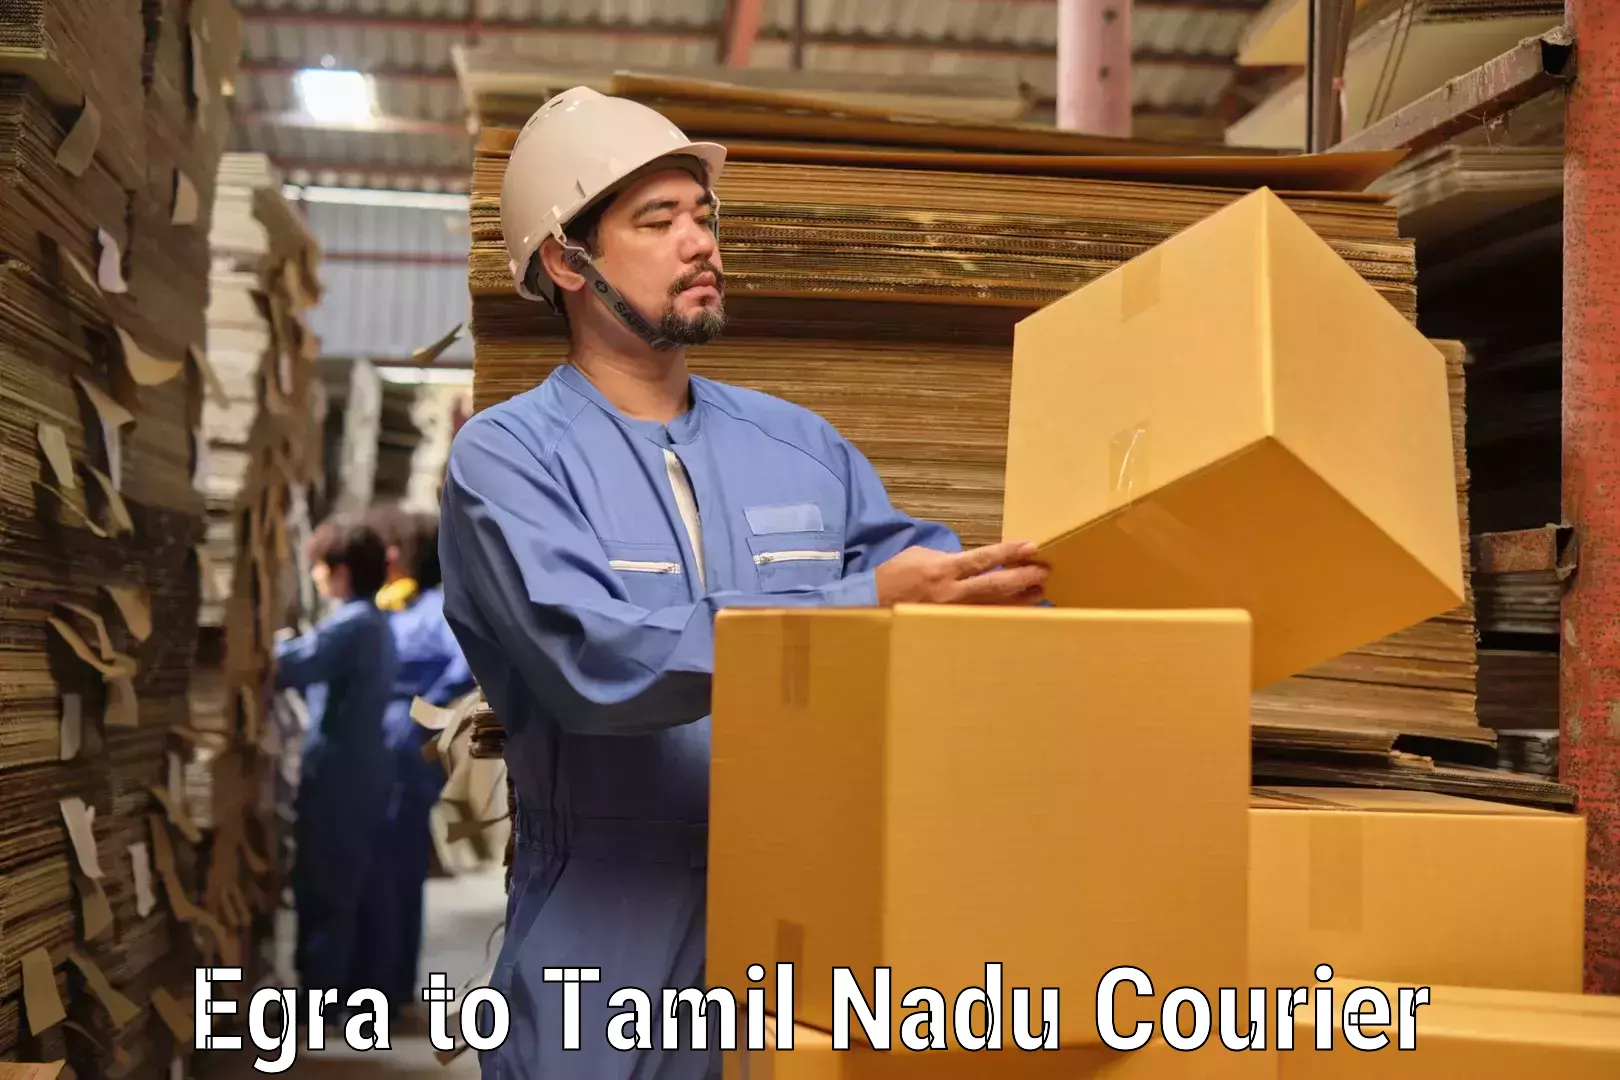 Reliable delivery network Egra to Tamil Nadu